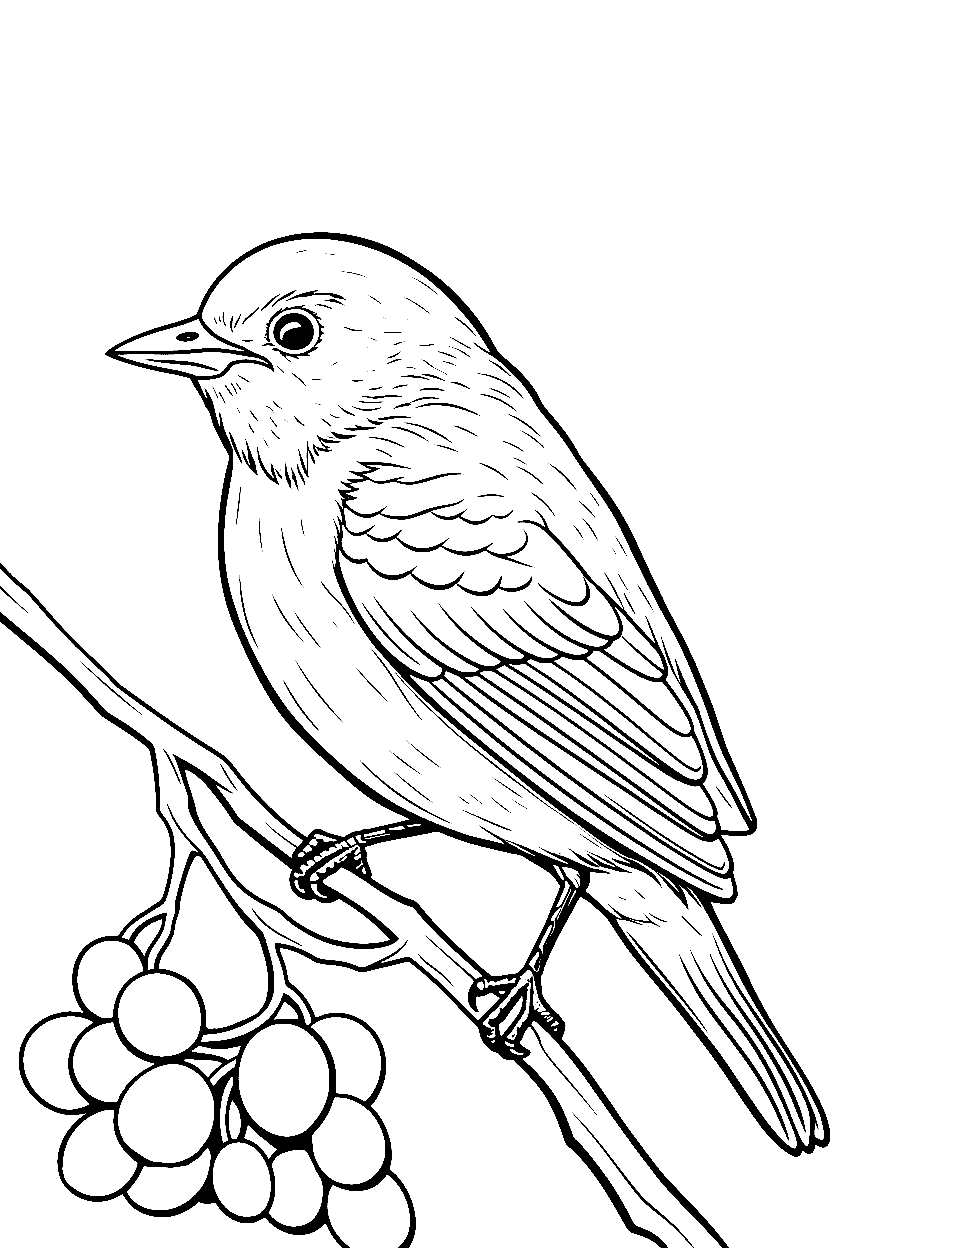 Robin's Berry Feast Coloring Page - A robin delighting in a bounty of red berries.